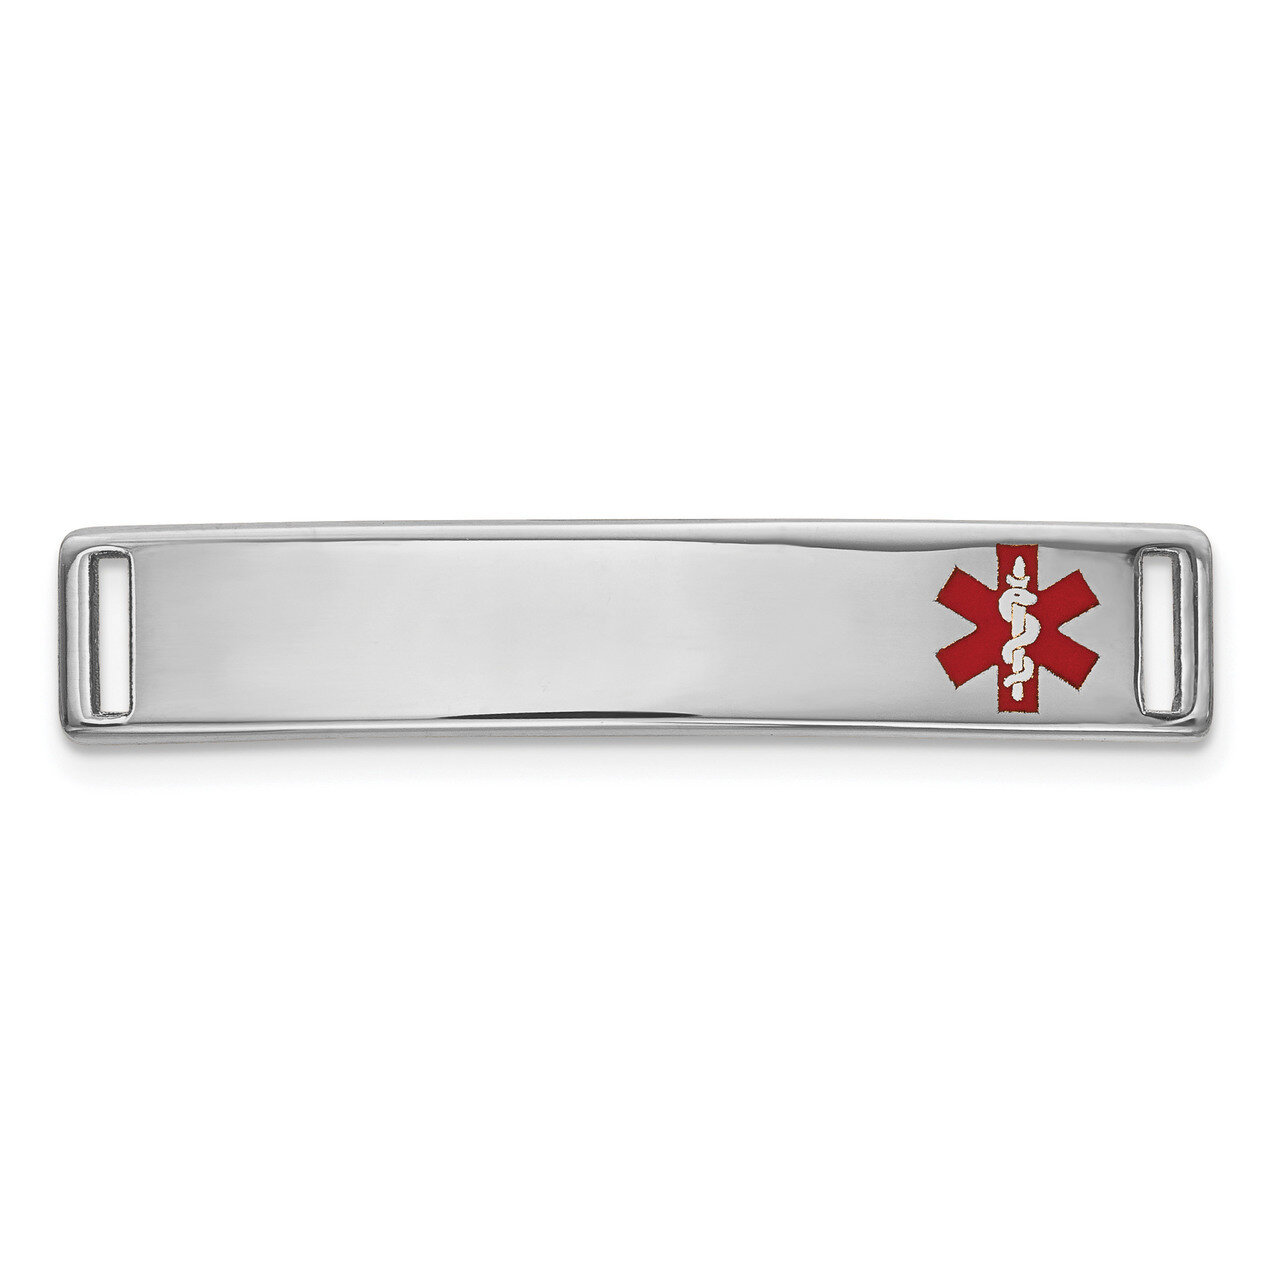 Epoxy Enameled Medical ID Off Ctr Plate # 816 14k white Gold XM642W